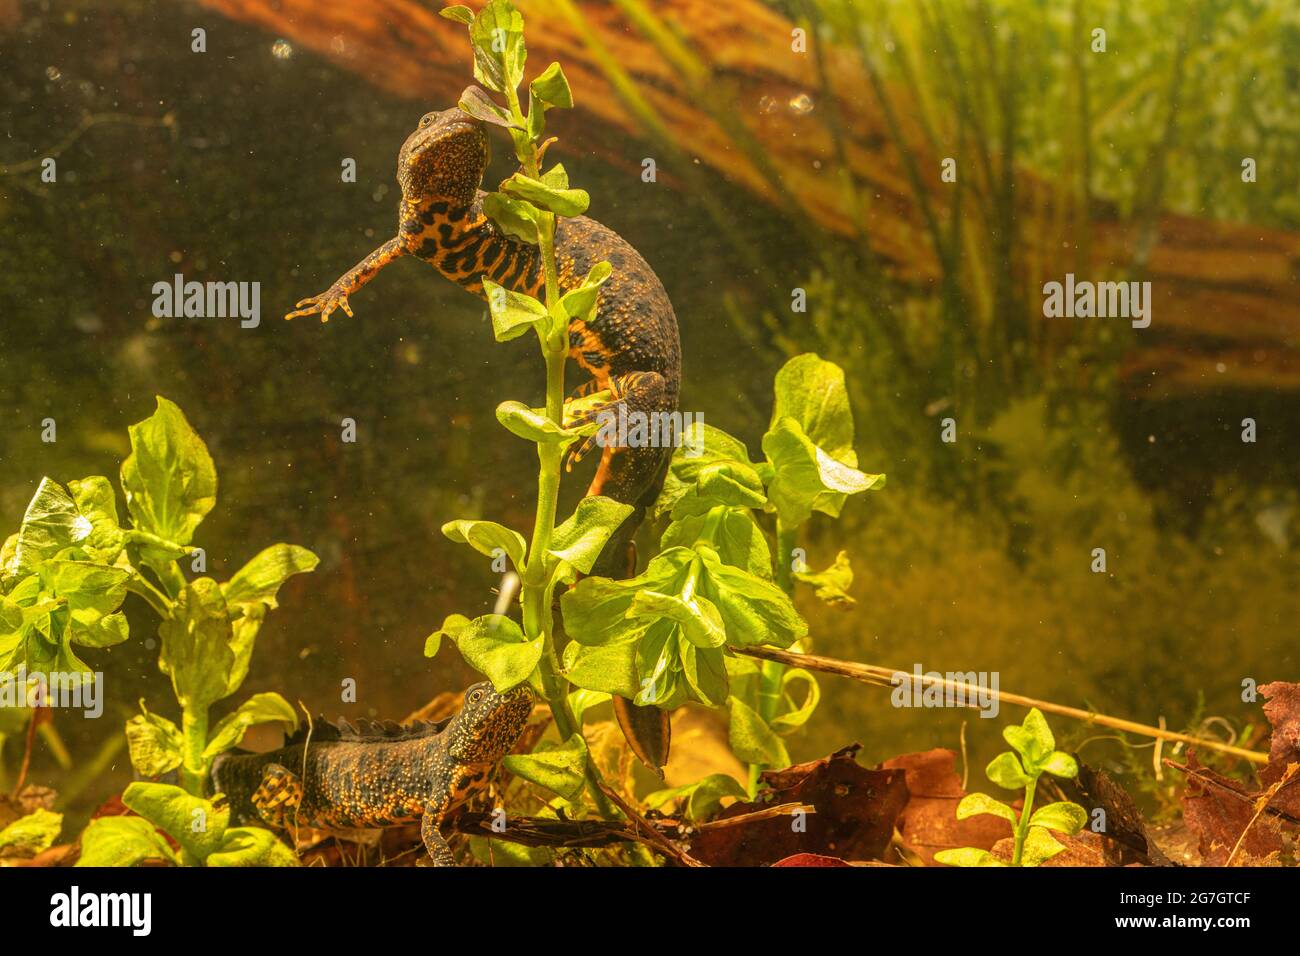 warty newt, crested newt, European crested newt (Triturus cristatus), female sticks an egg on a Lysimachia leaf, male in the back, Germany Stock Photo